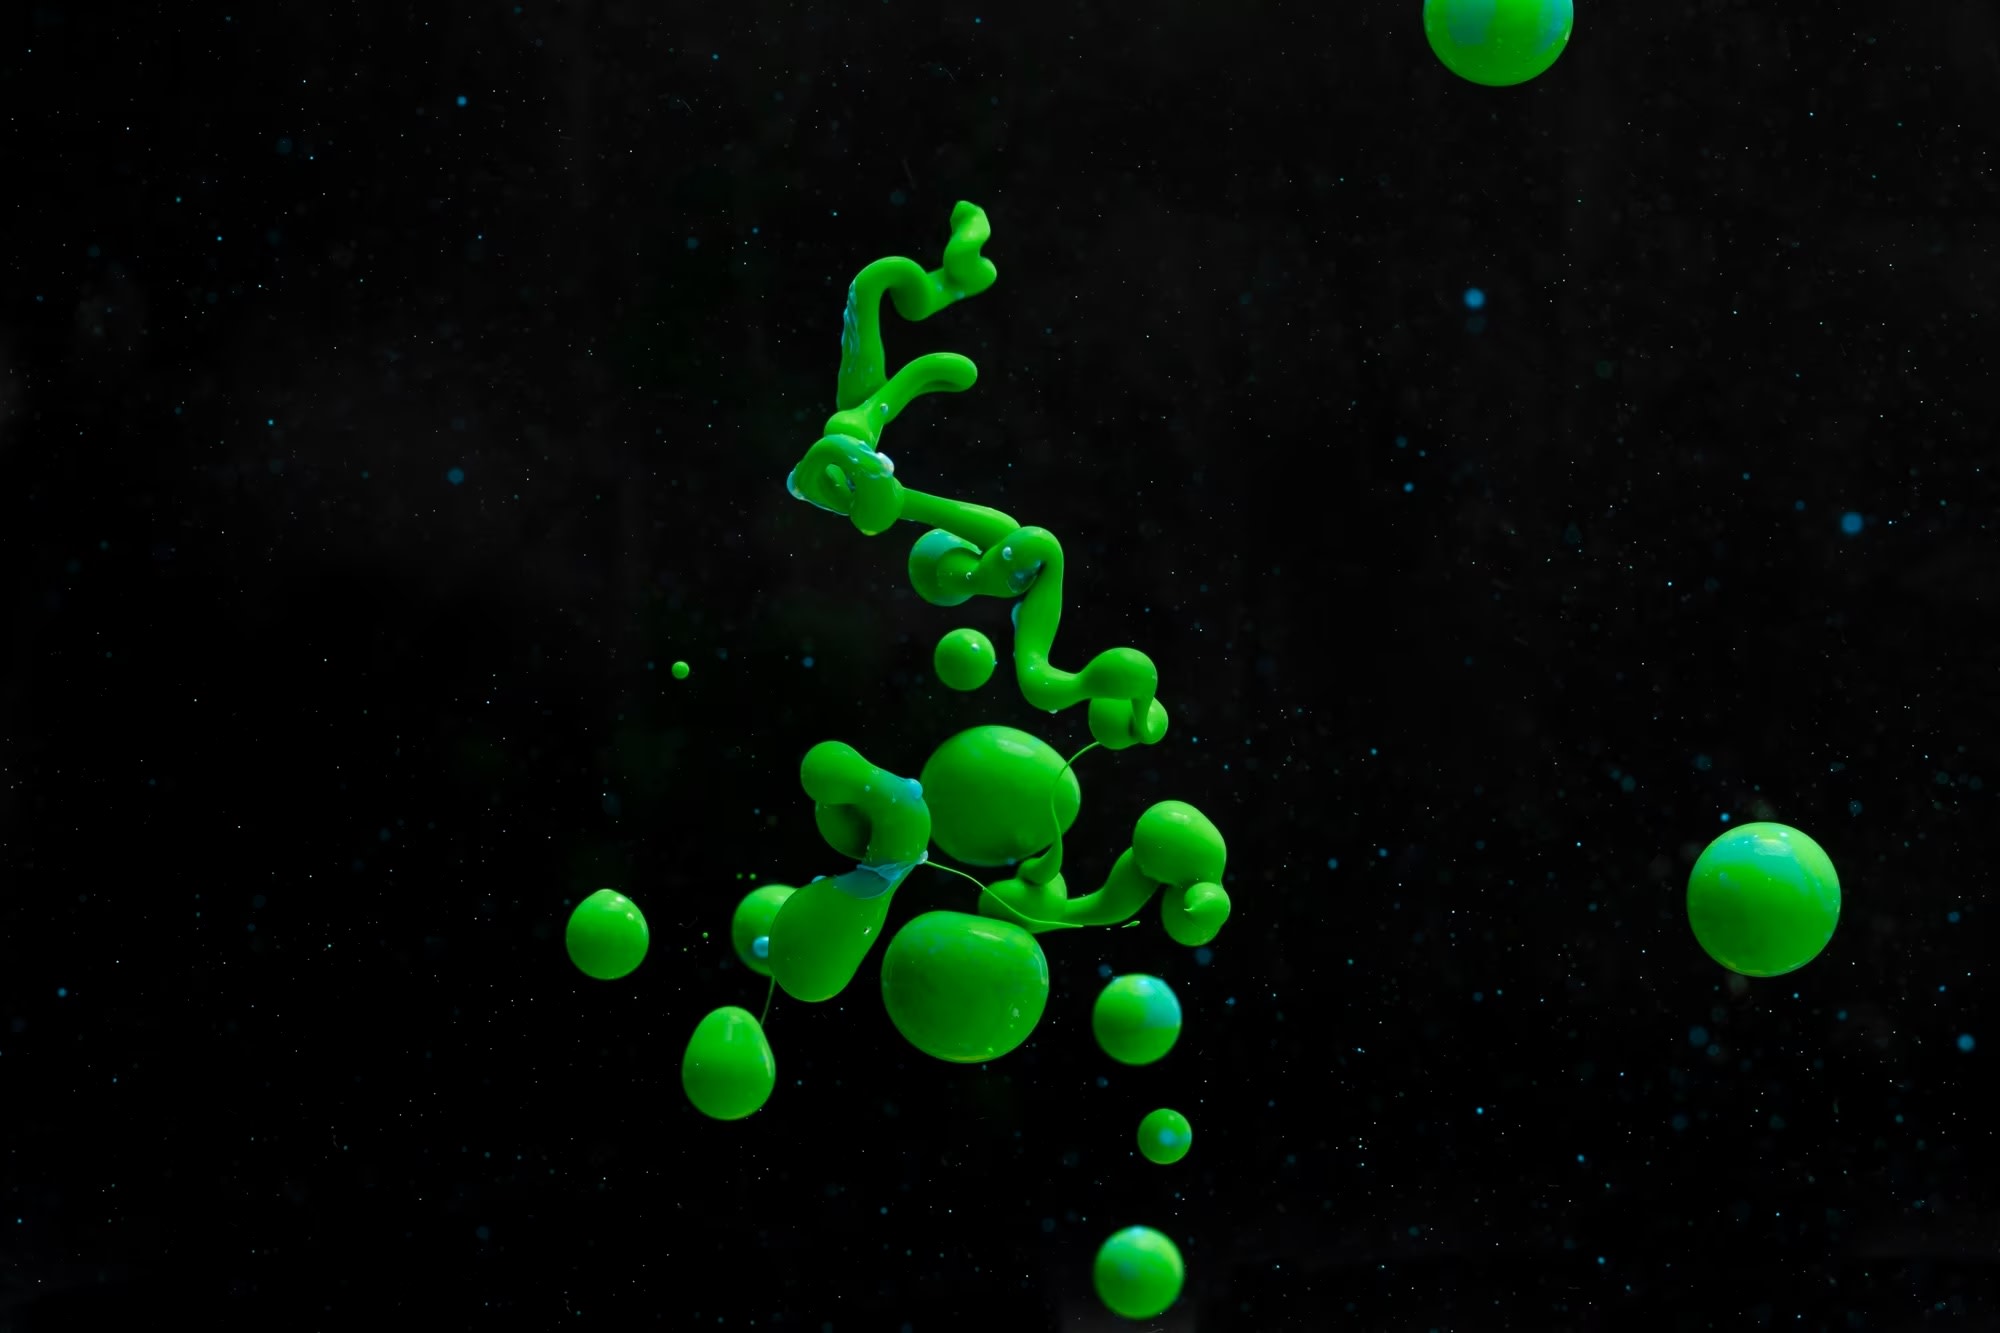 Abstract acrylic green liquid shapes on a black background